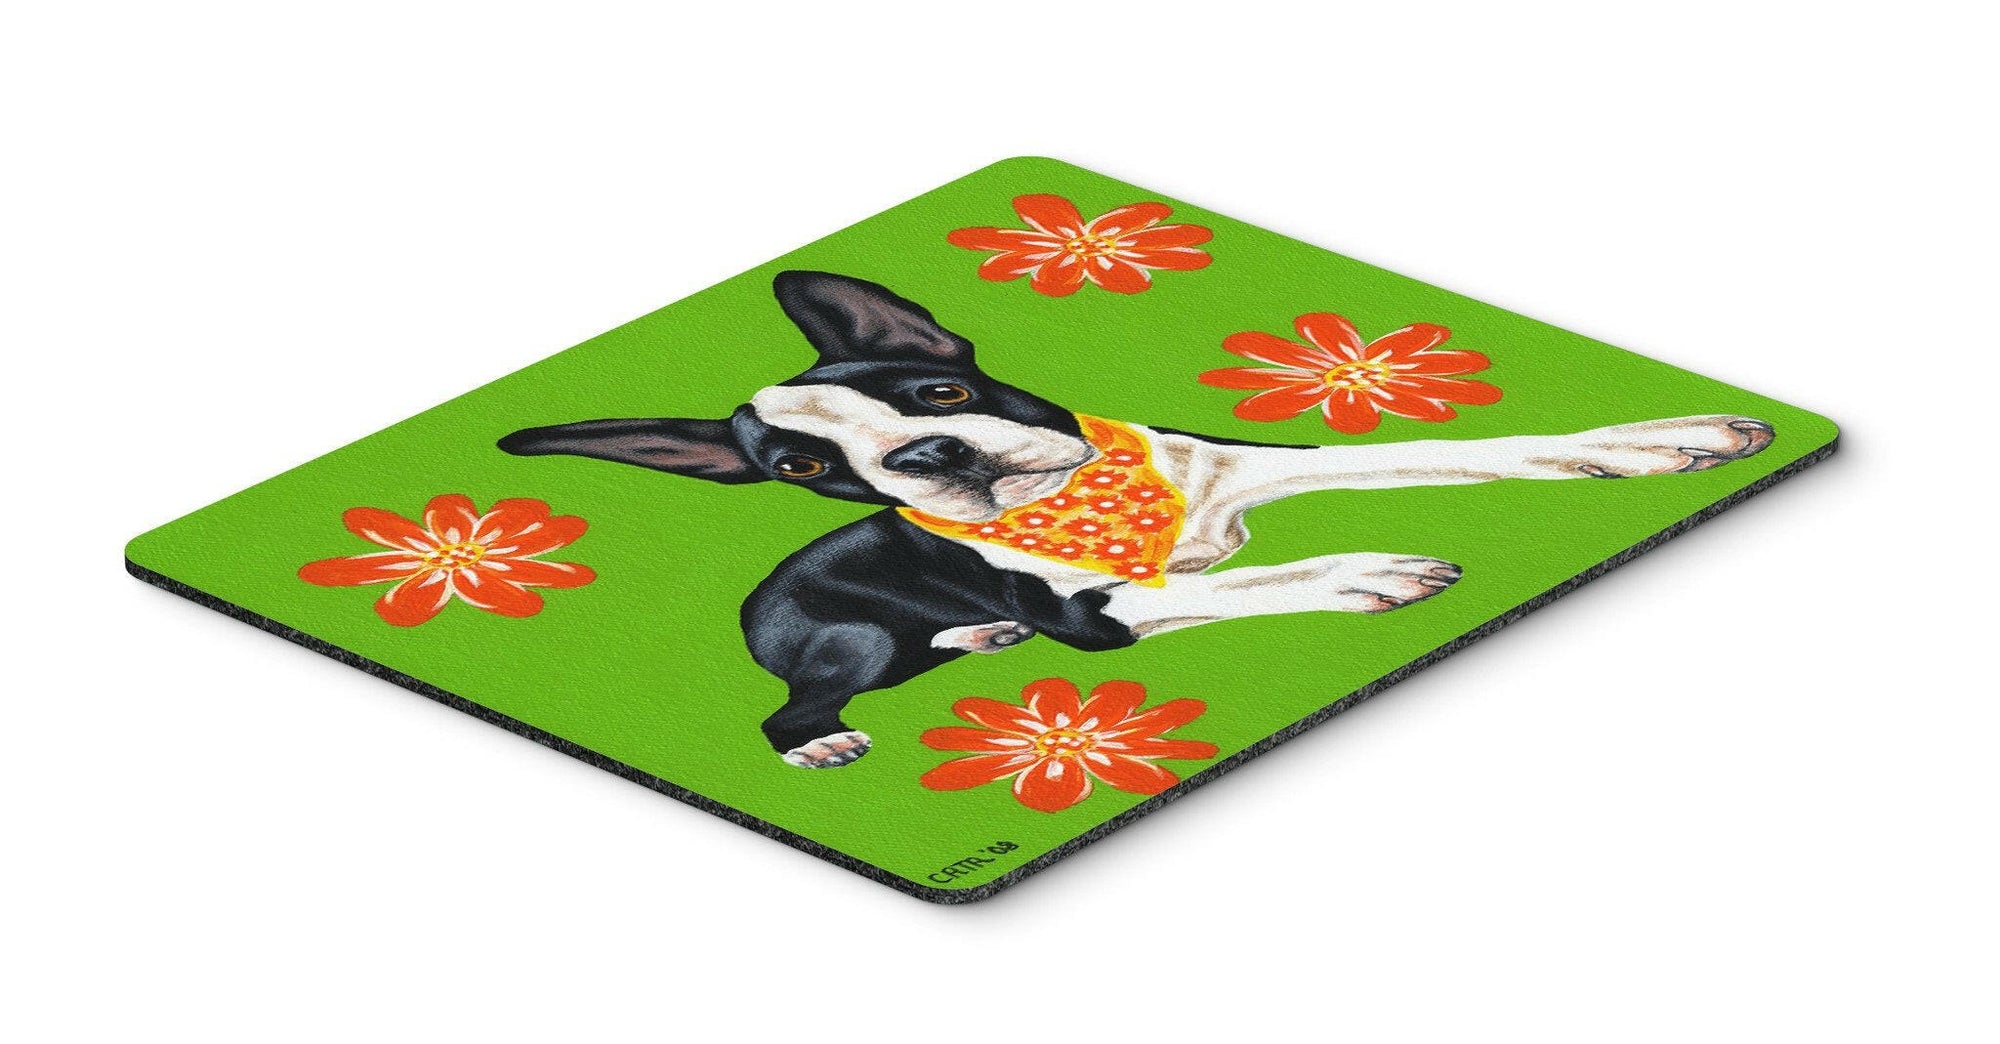 Cosmo Cutie Boston Terrier Mouse Pad, Hot Pad or Trivet AMB1385MP by Caroline's Treasures